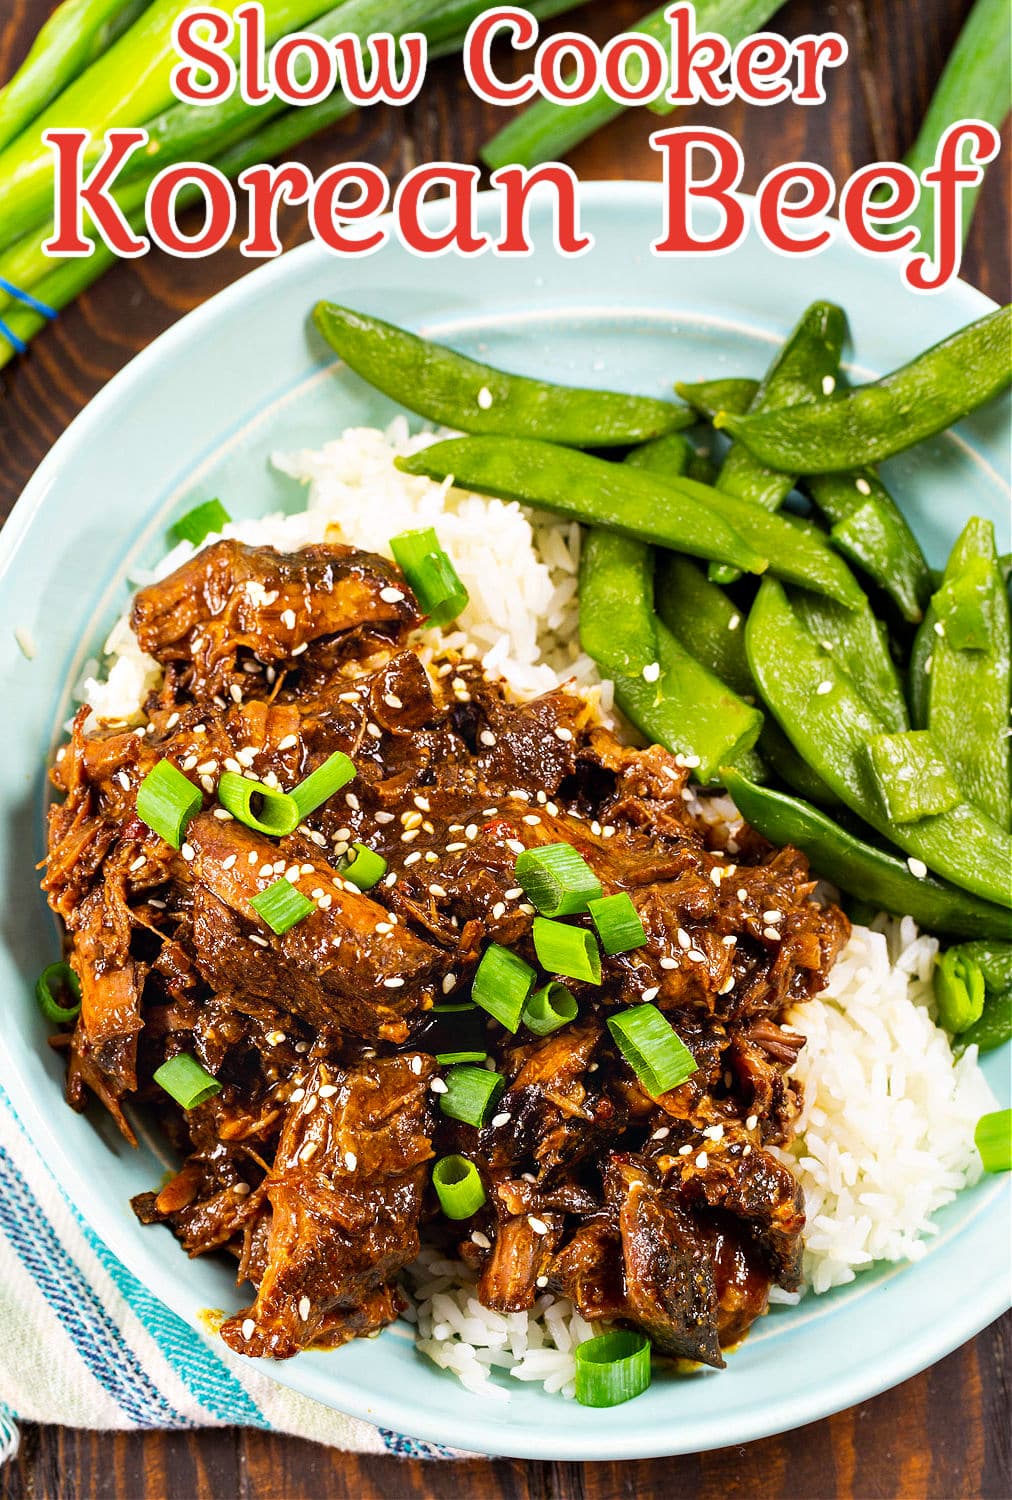 Slow Cooker Korean Beef over white rice.